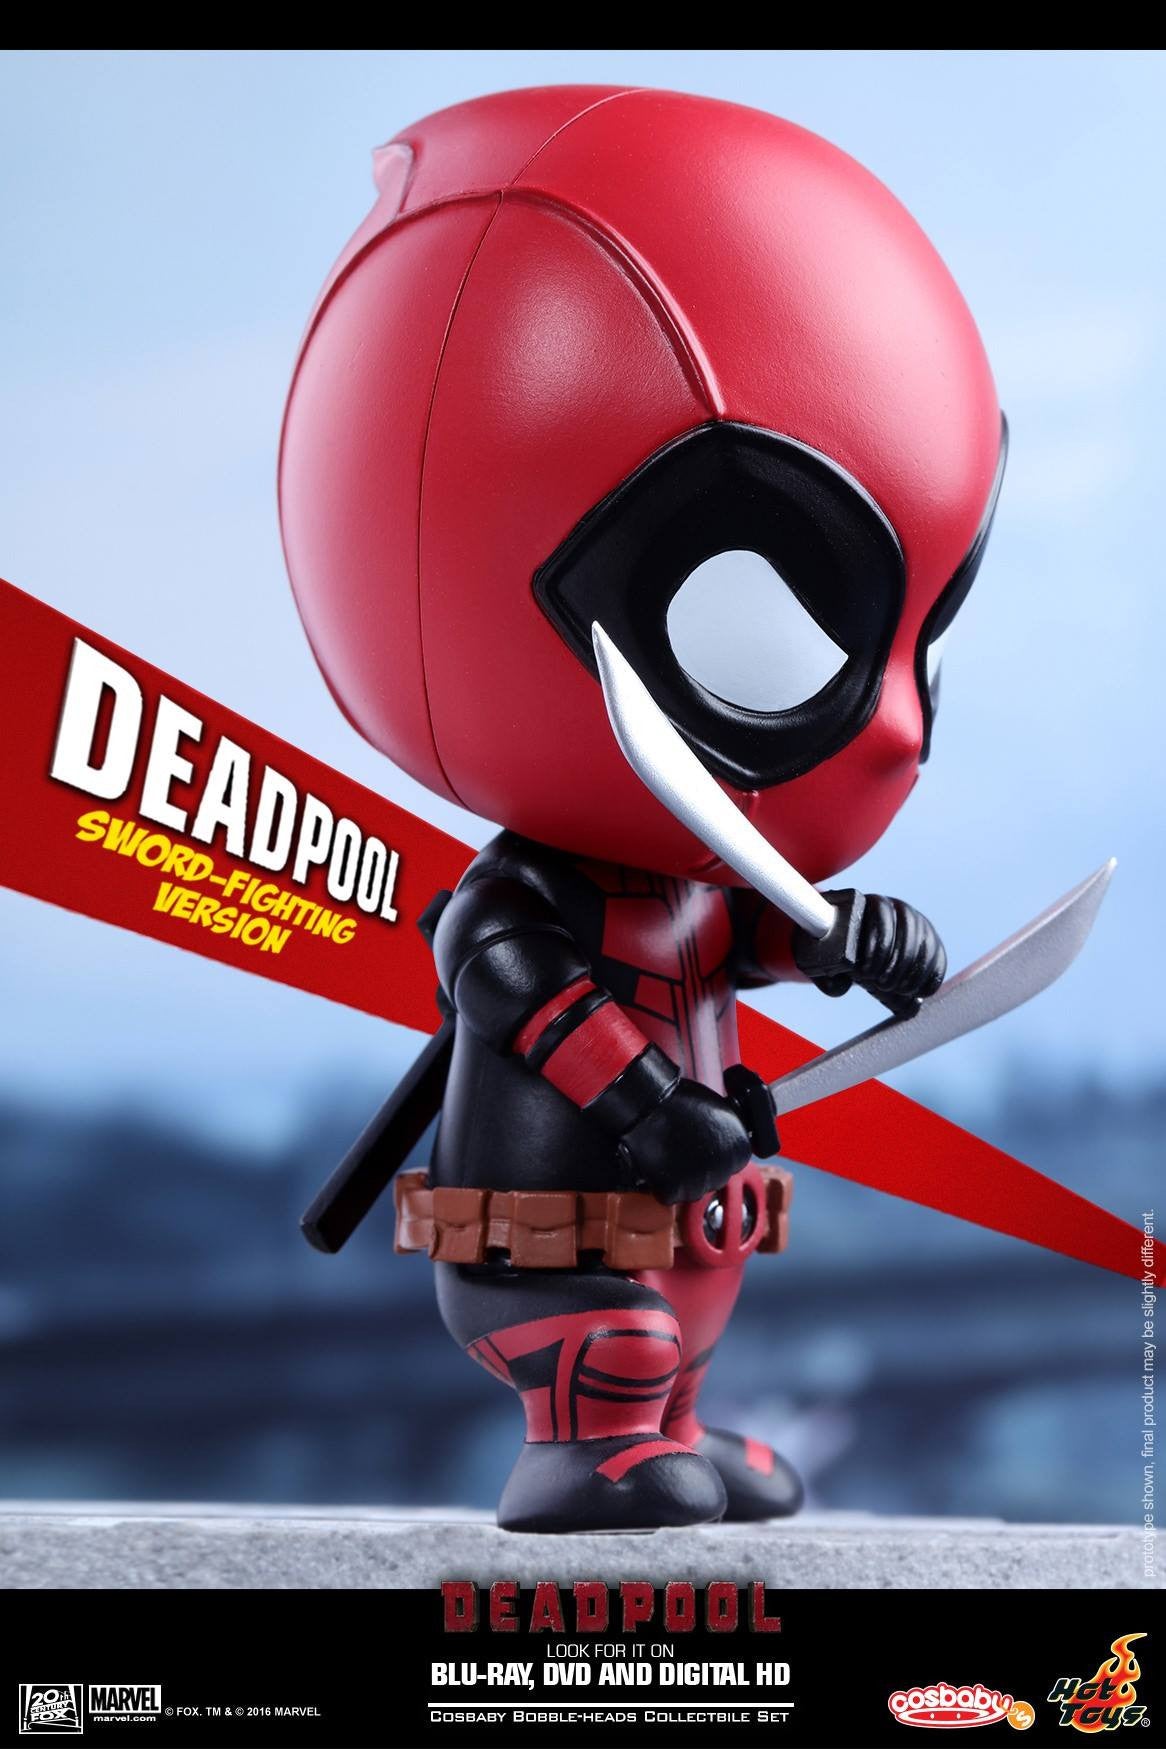 Hot Toys - COSB220 - Deadpool (Sword-Fighting Version) Cosbaby Bobble-Head - Marvelous Toys